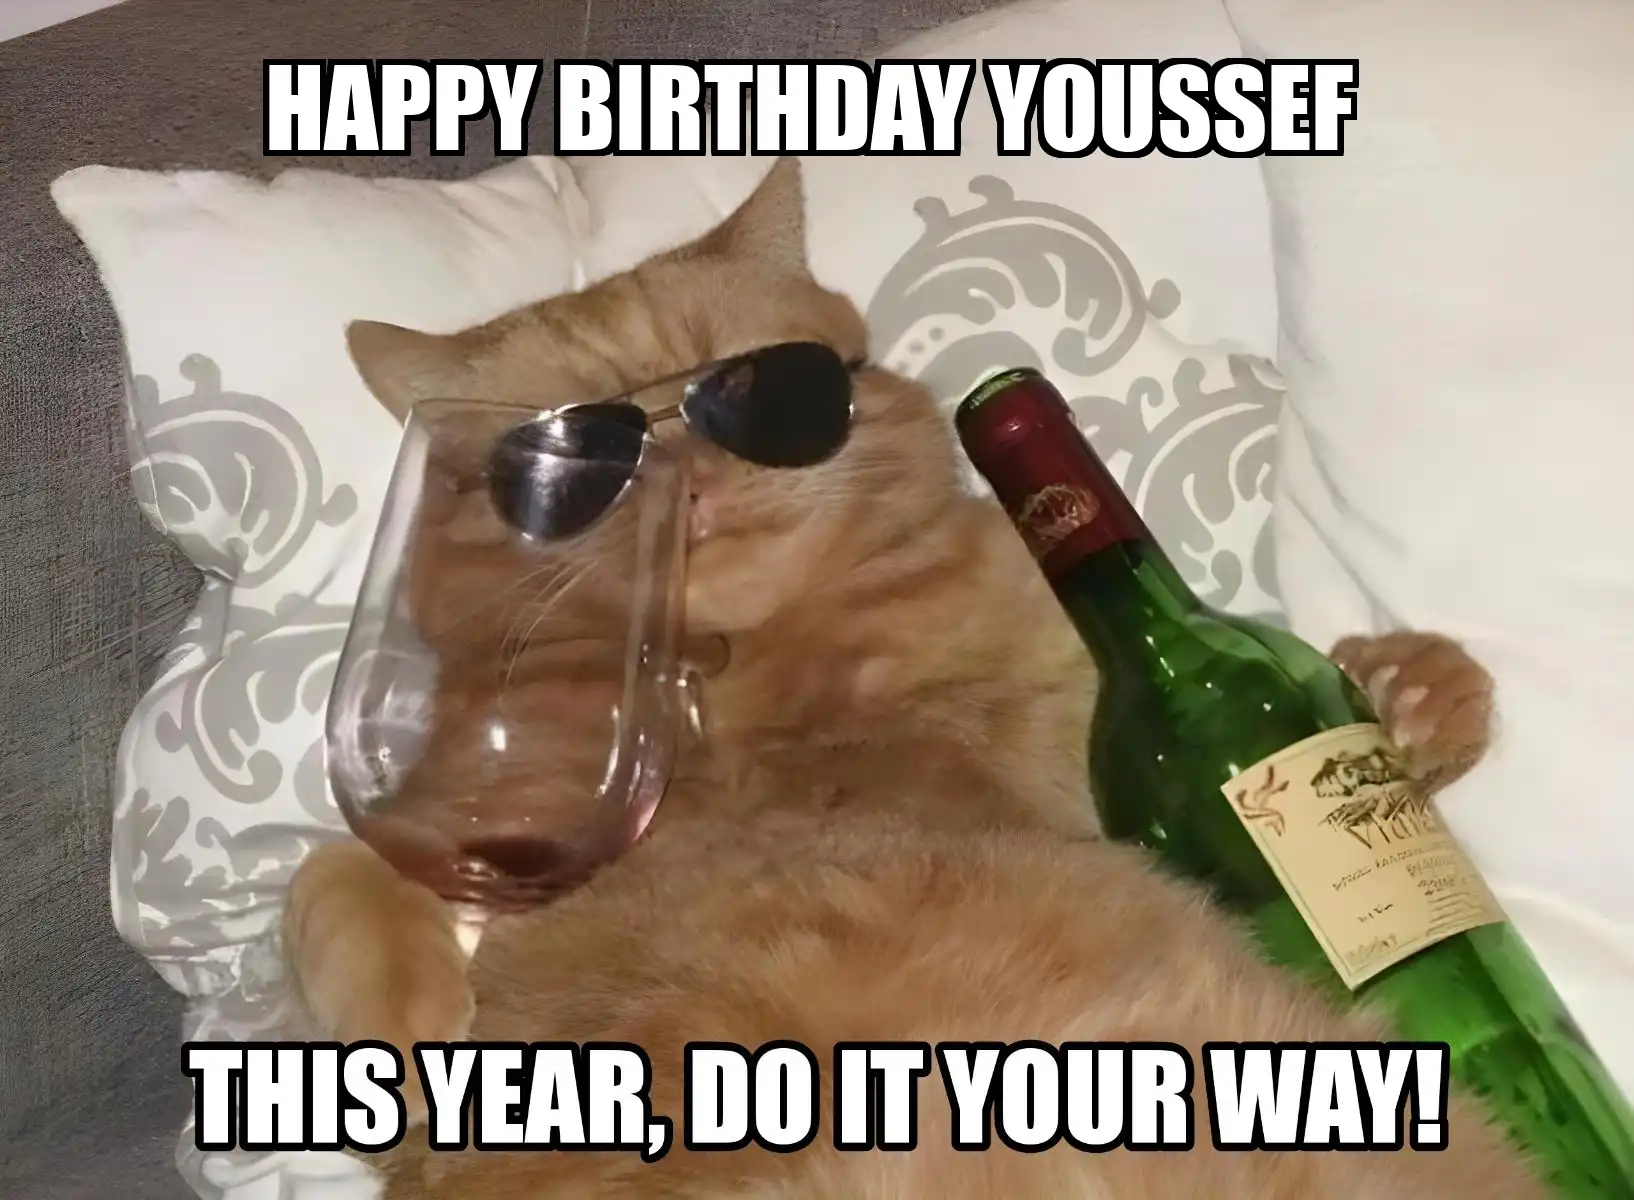 Happy Birthday Youssef This Year Do It Your Way Meme